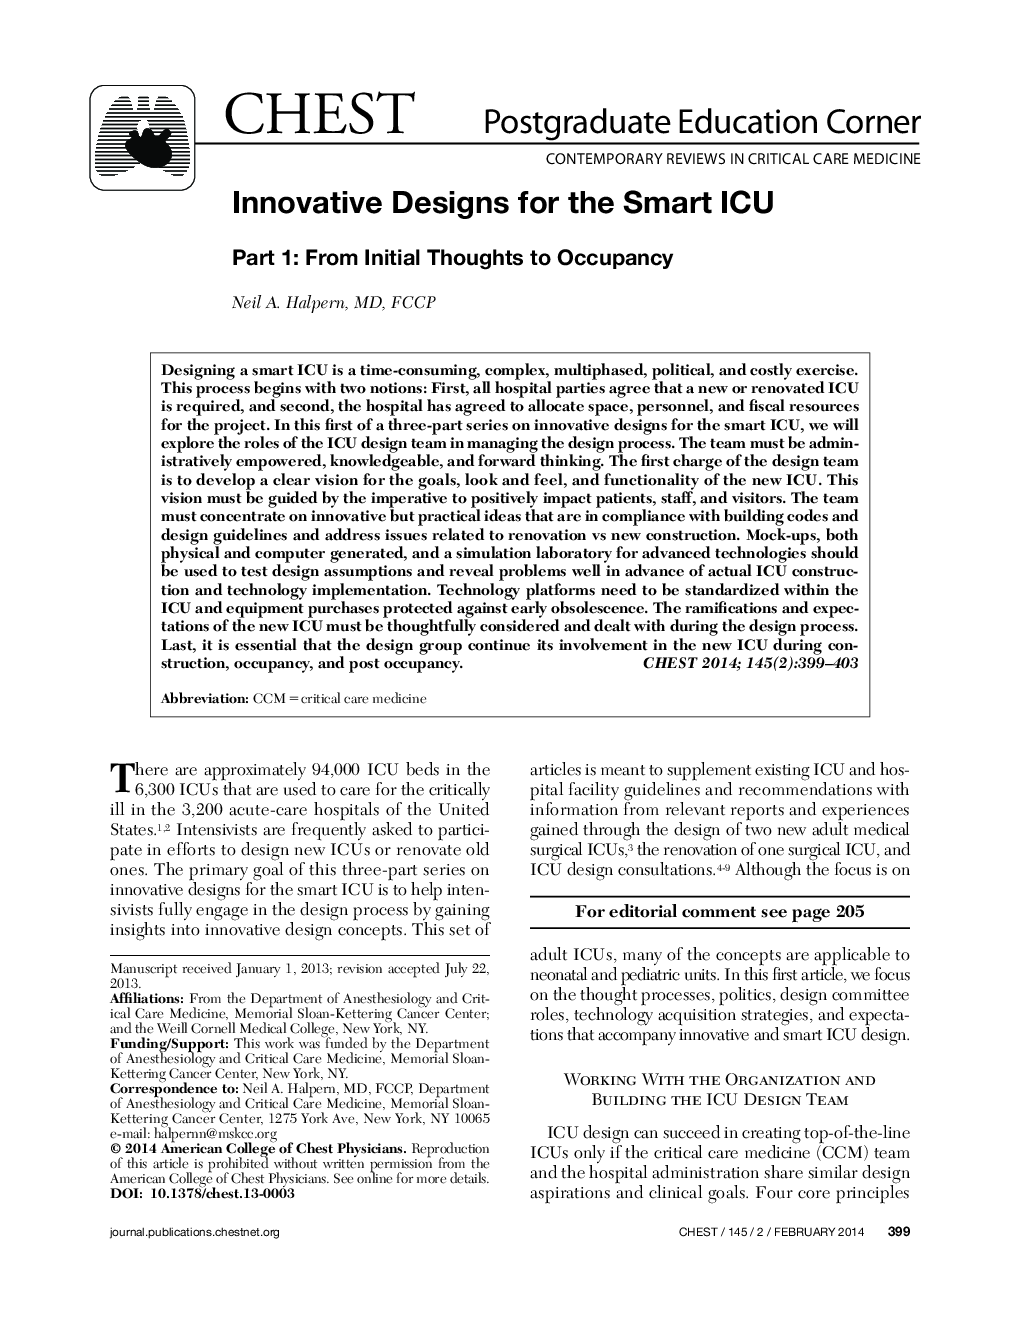 Innovative Designs for the Smart ICU